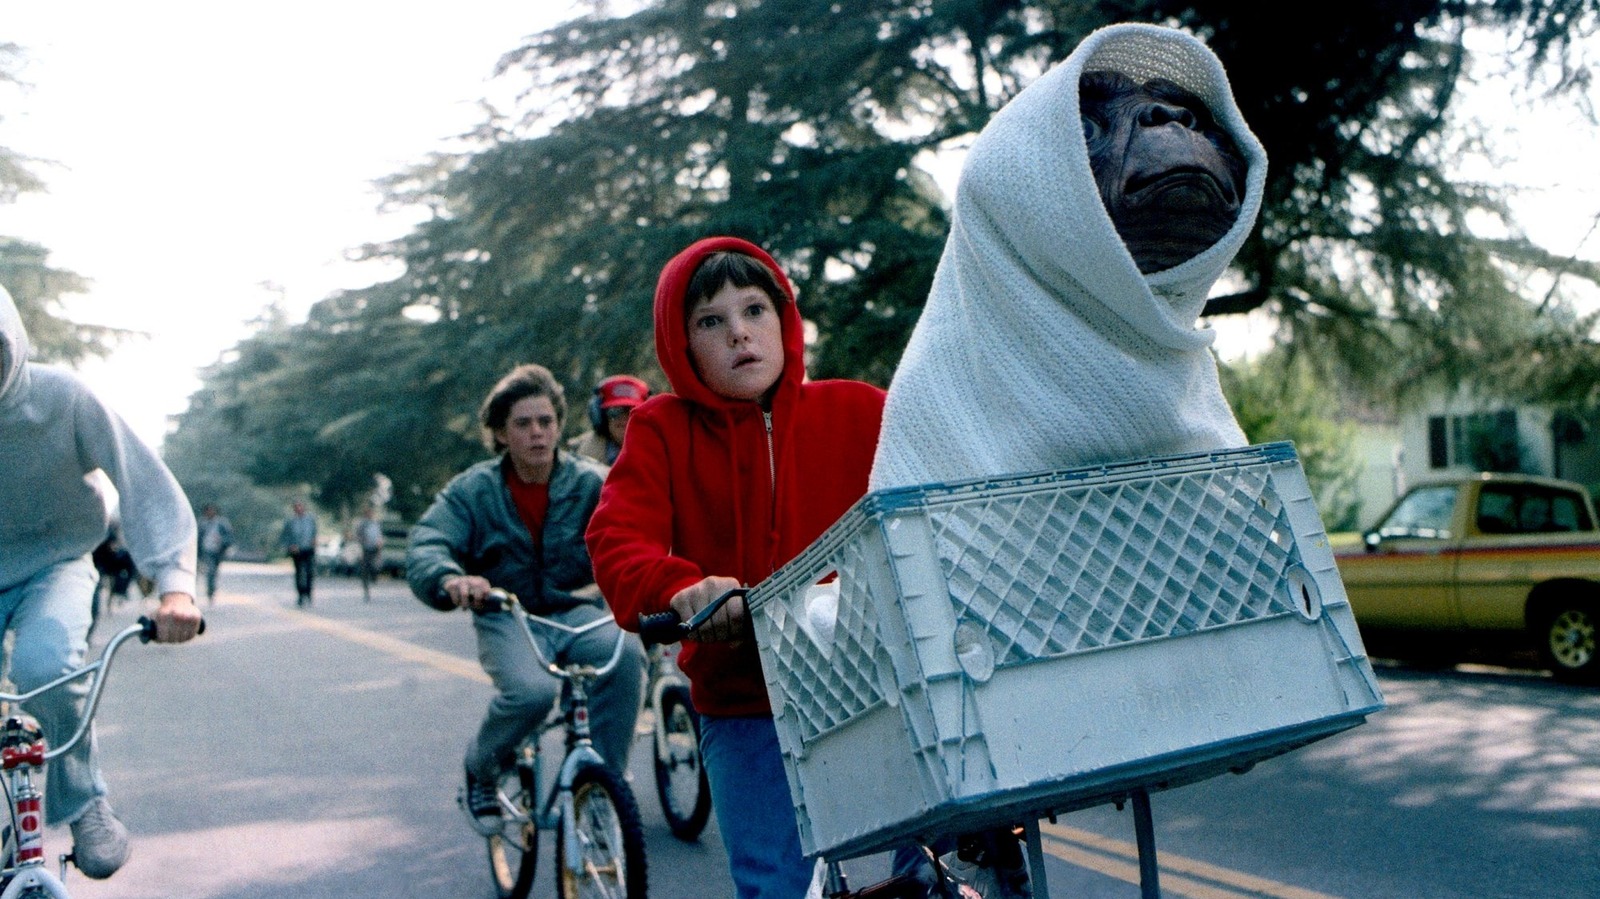 The Oscar-winning costume designer of E.T. reflects on this Halloween scene and creates a timeless classic [Exclusive Interview]